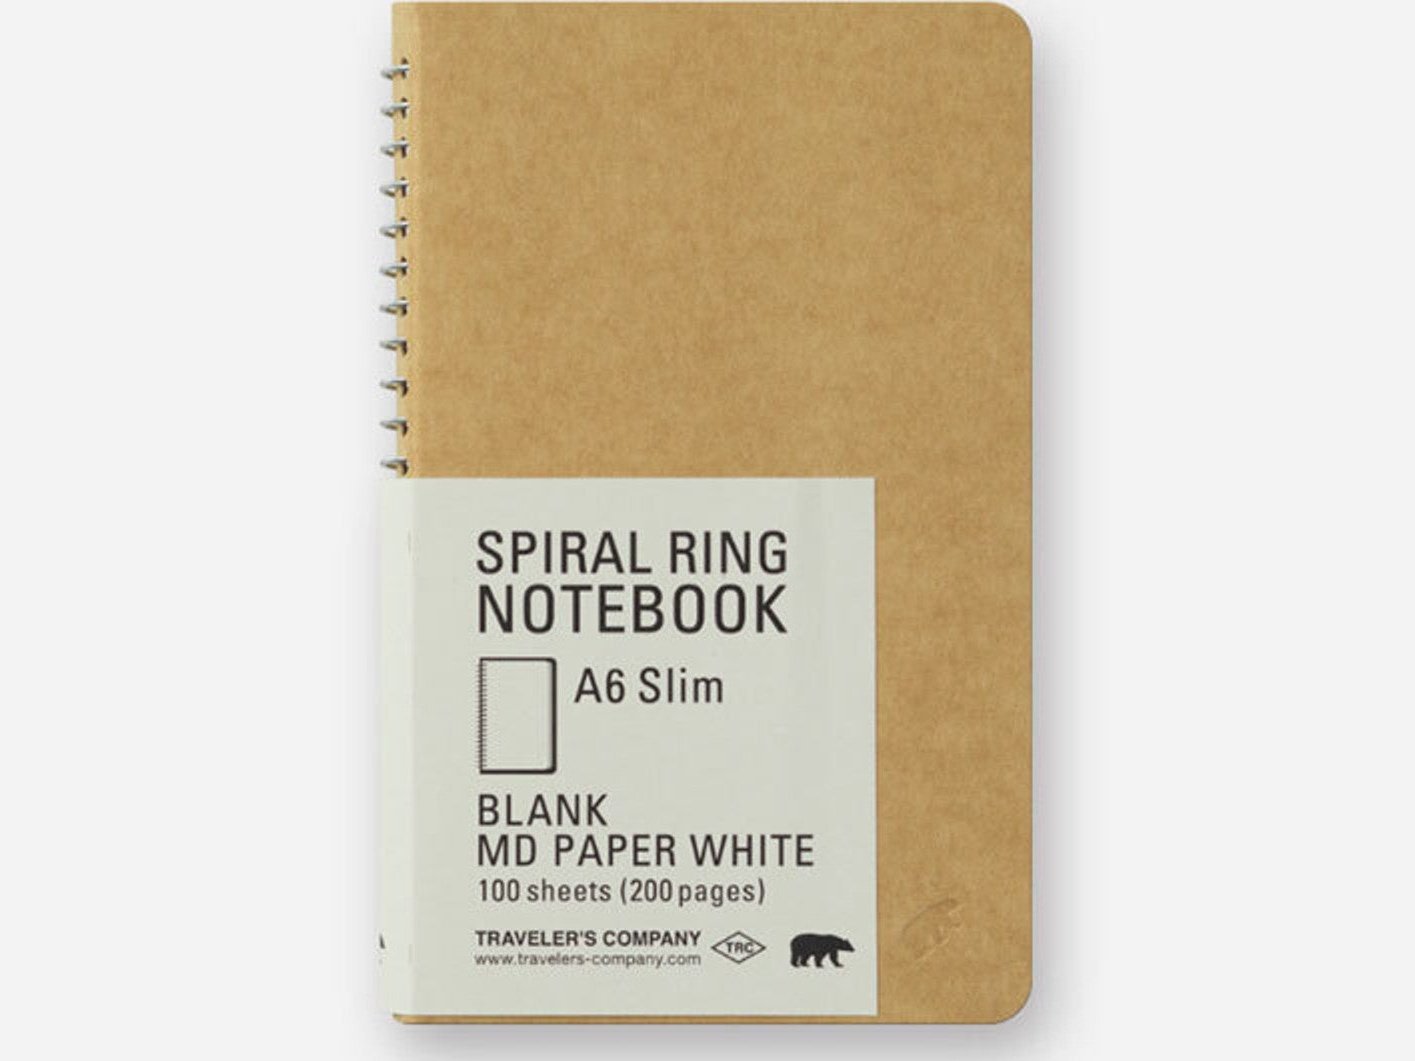 Traveler's Company Spiral Ring Notebook A6 Slim